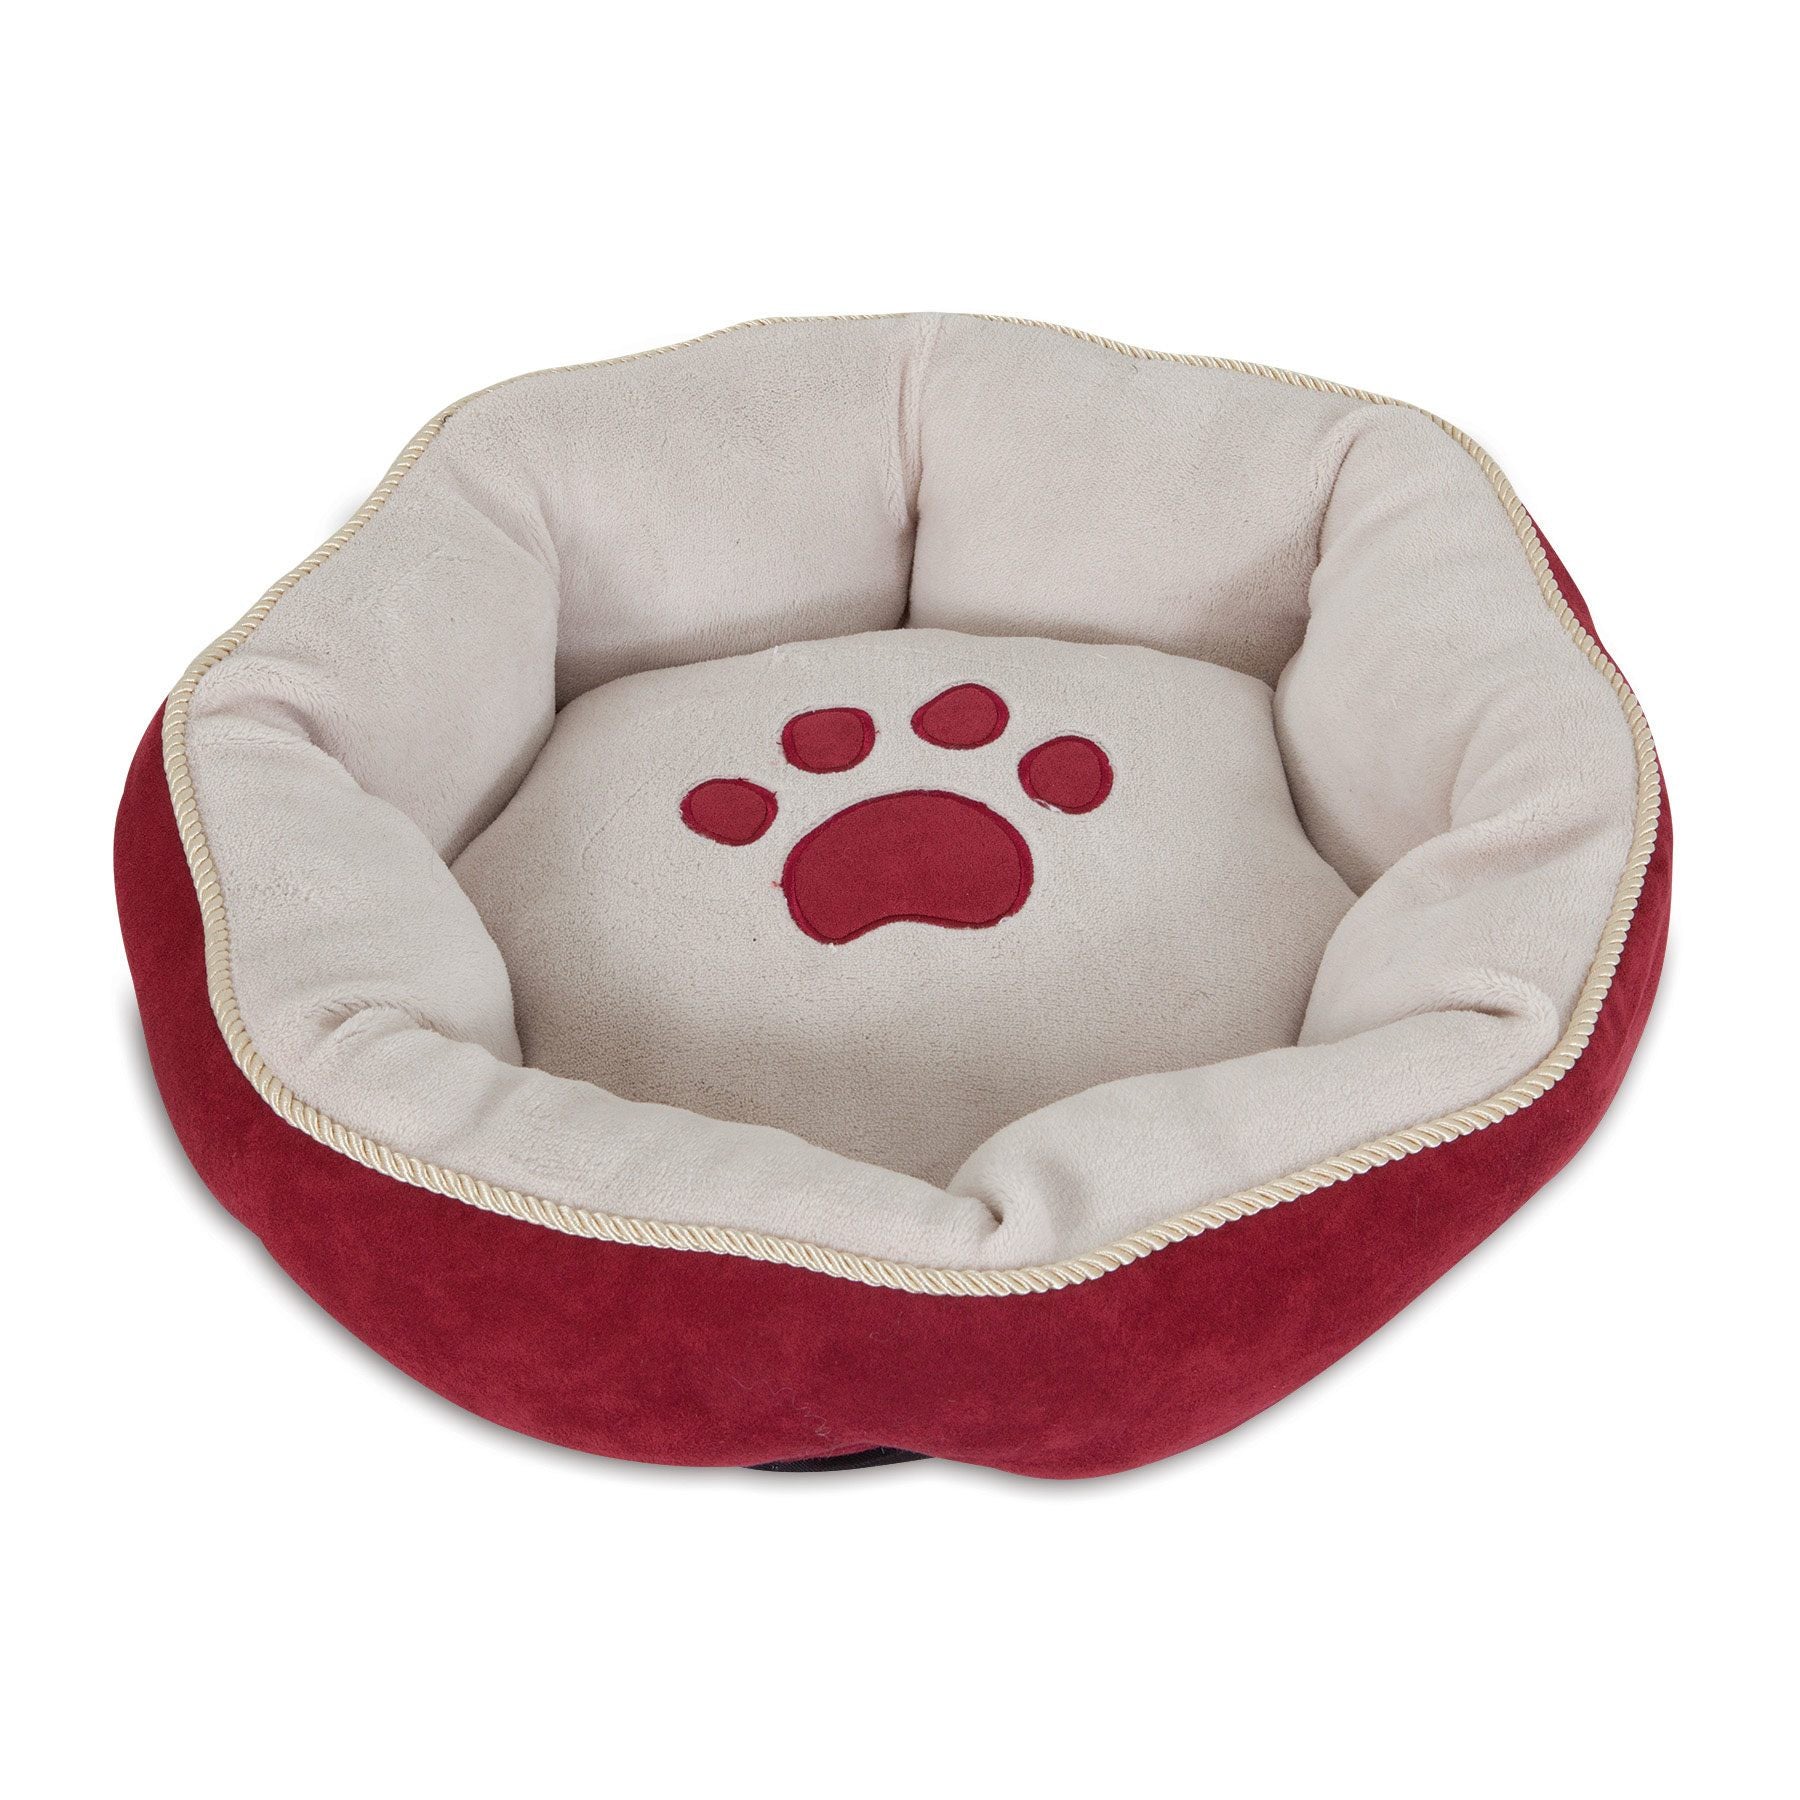 Aspen Pet Round Bed With Paw Applique & Gold Cord